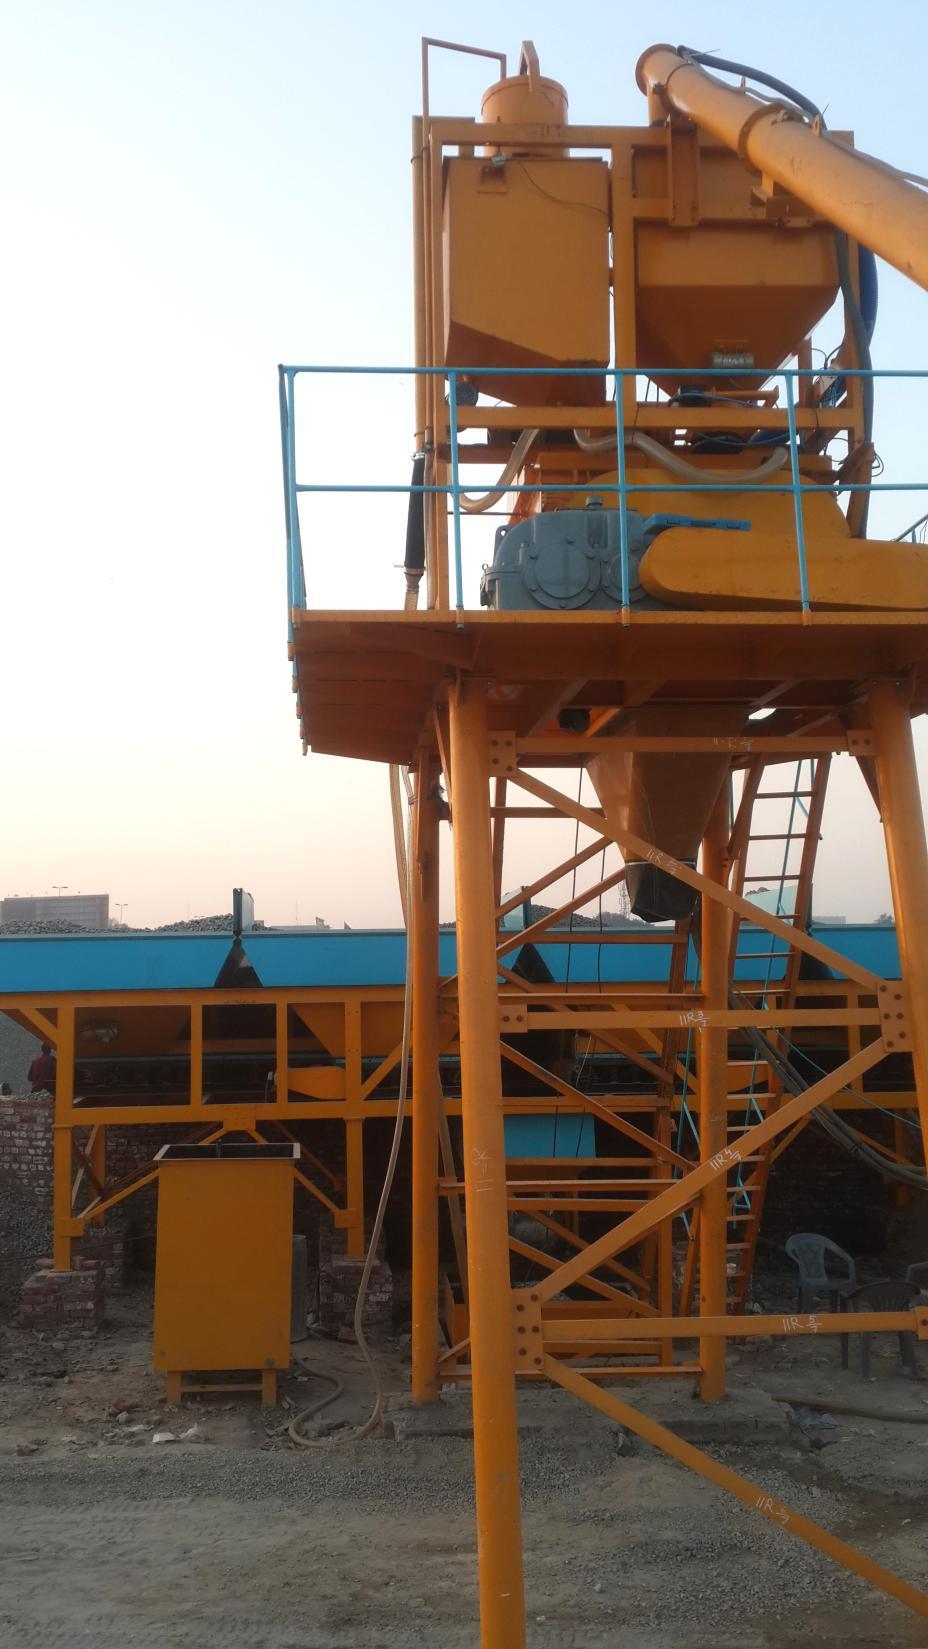 Automix - Concrete Mixing Technology We are concrete batching plant manufacturers servicing the concrete / construction industry in south east asia and the middle east.